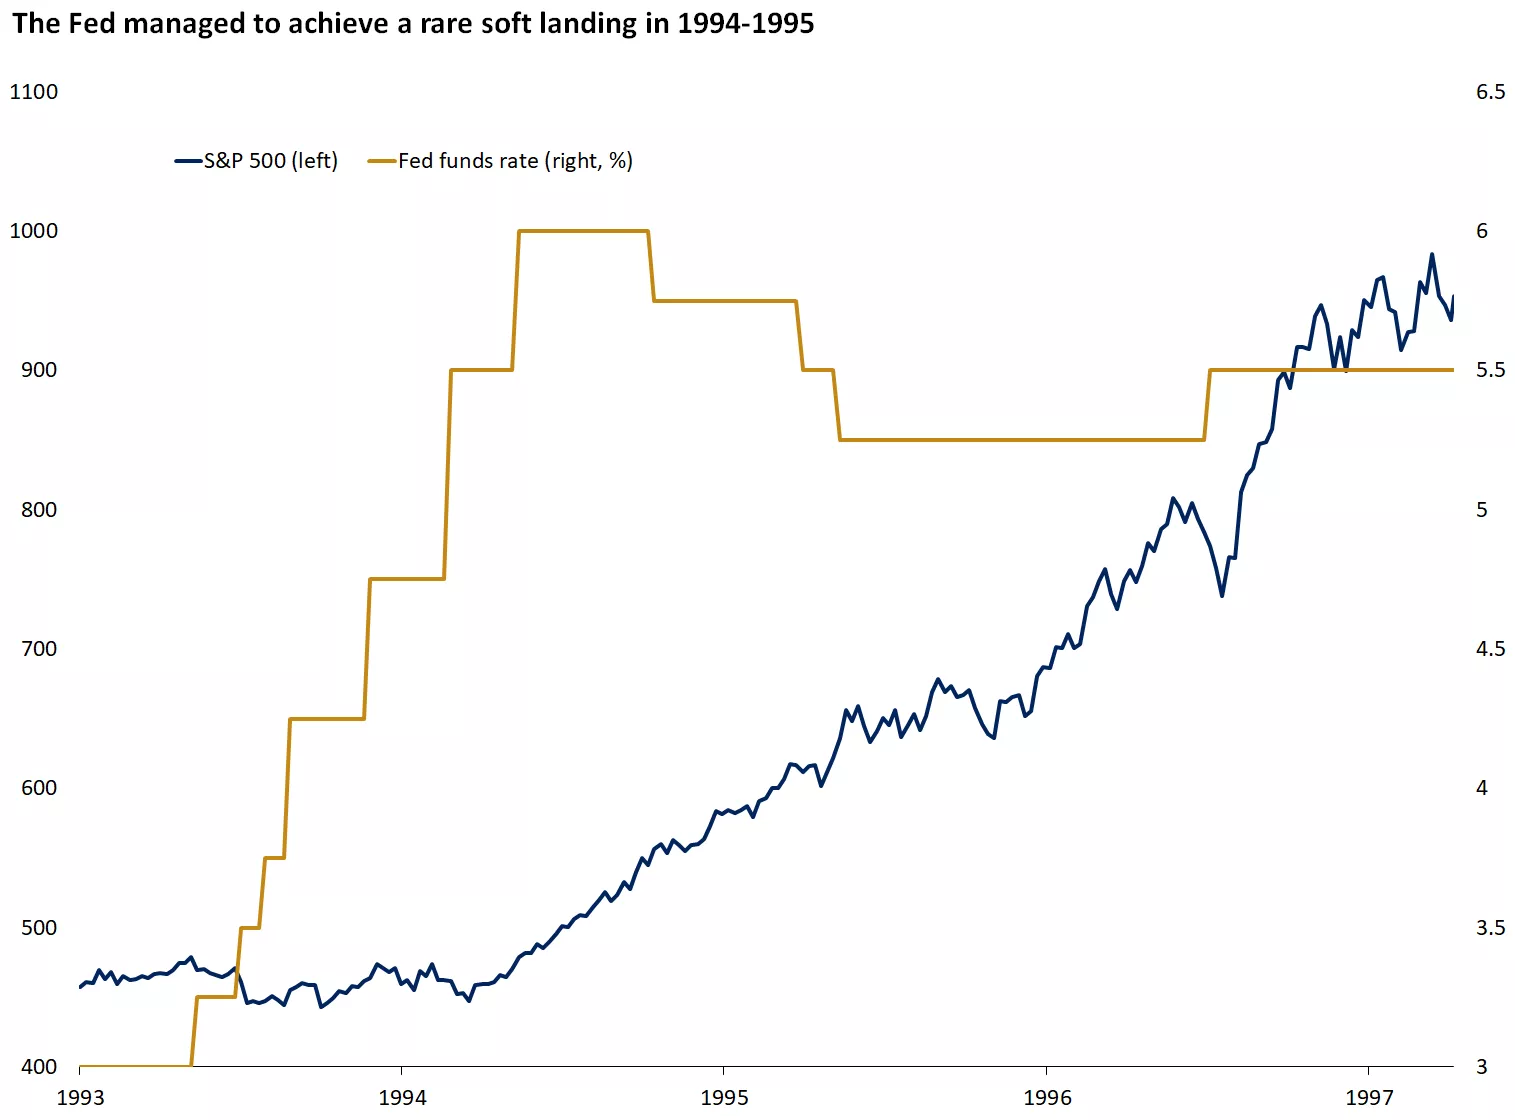  Chart showing the Fed managed to achieve a rare soft landing in 1994-1995
